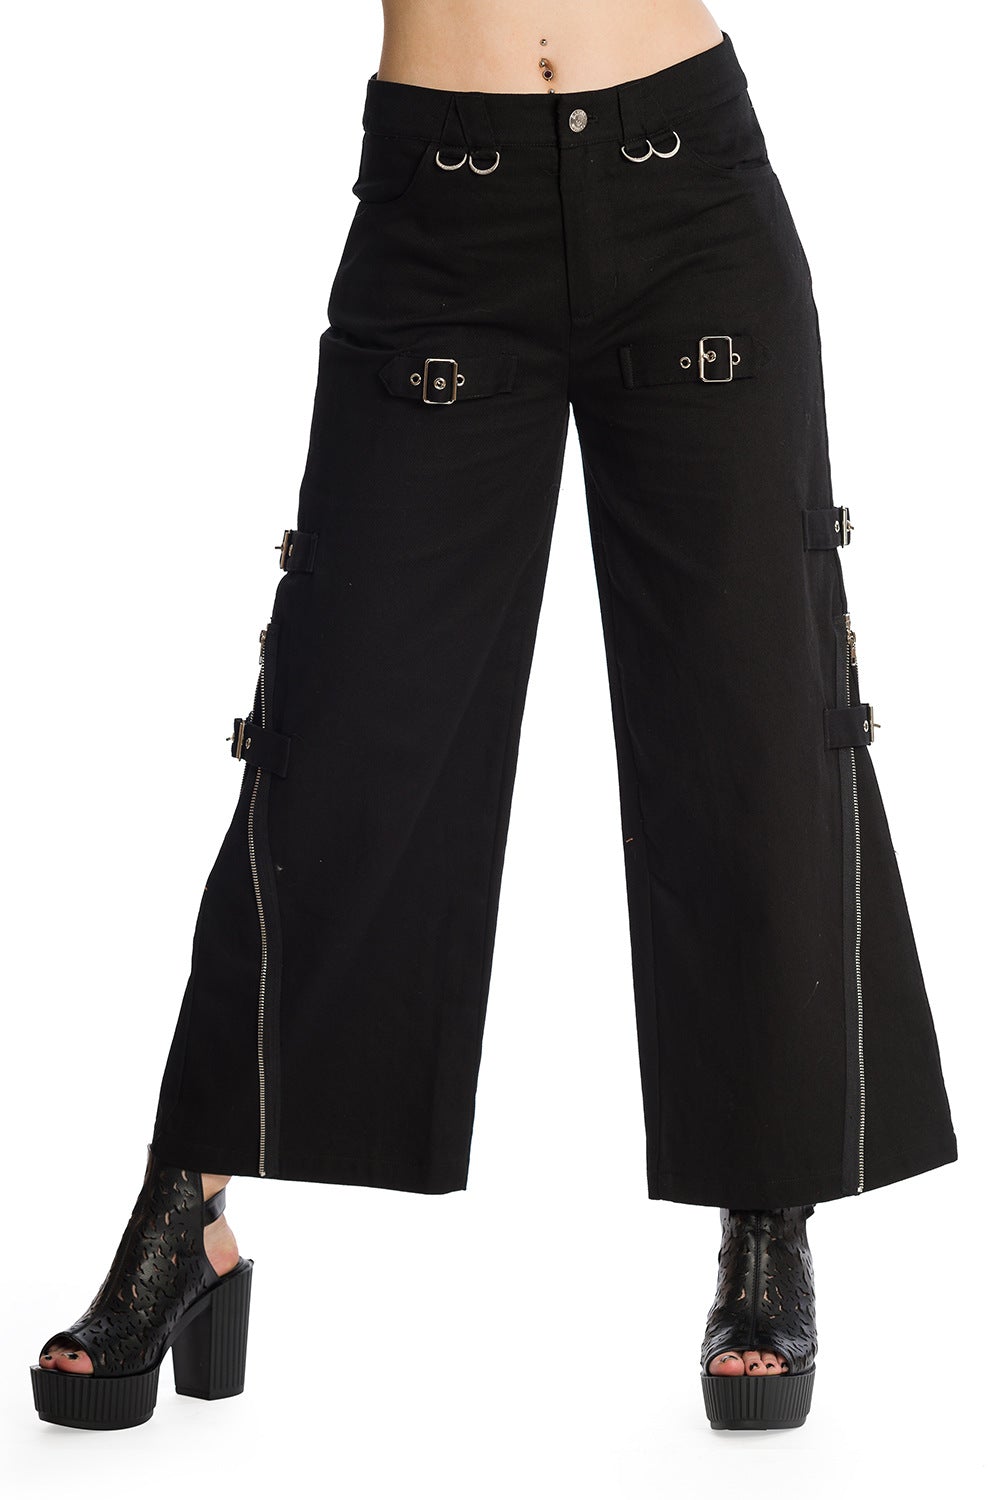 Banned Alternative Tanith 3/4 Length Straight Cut Trousers